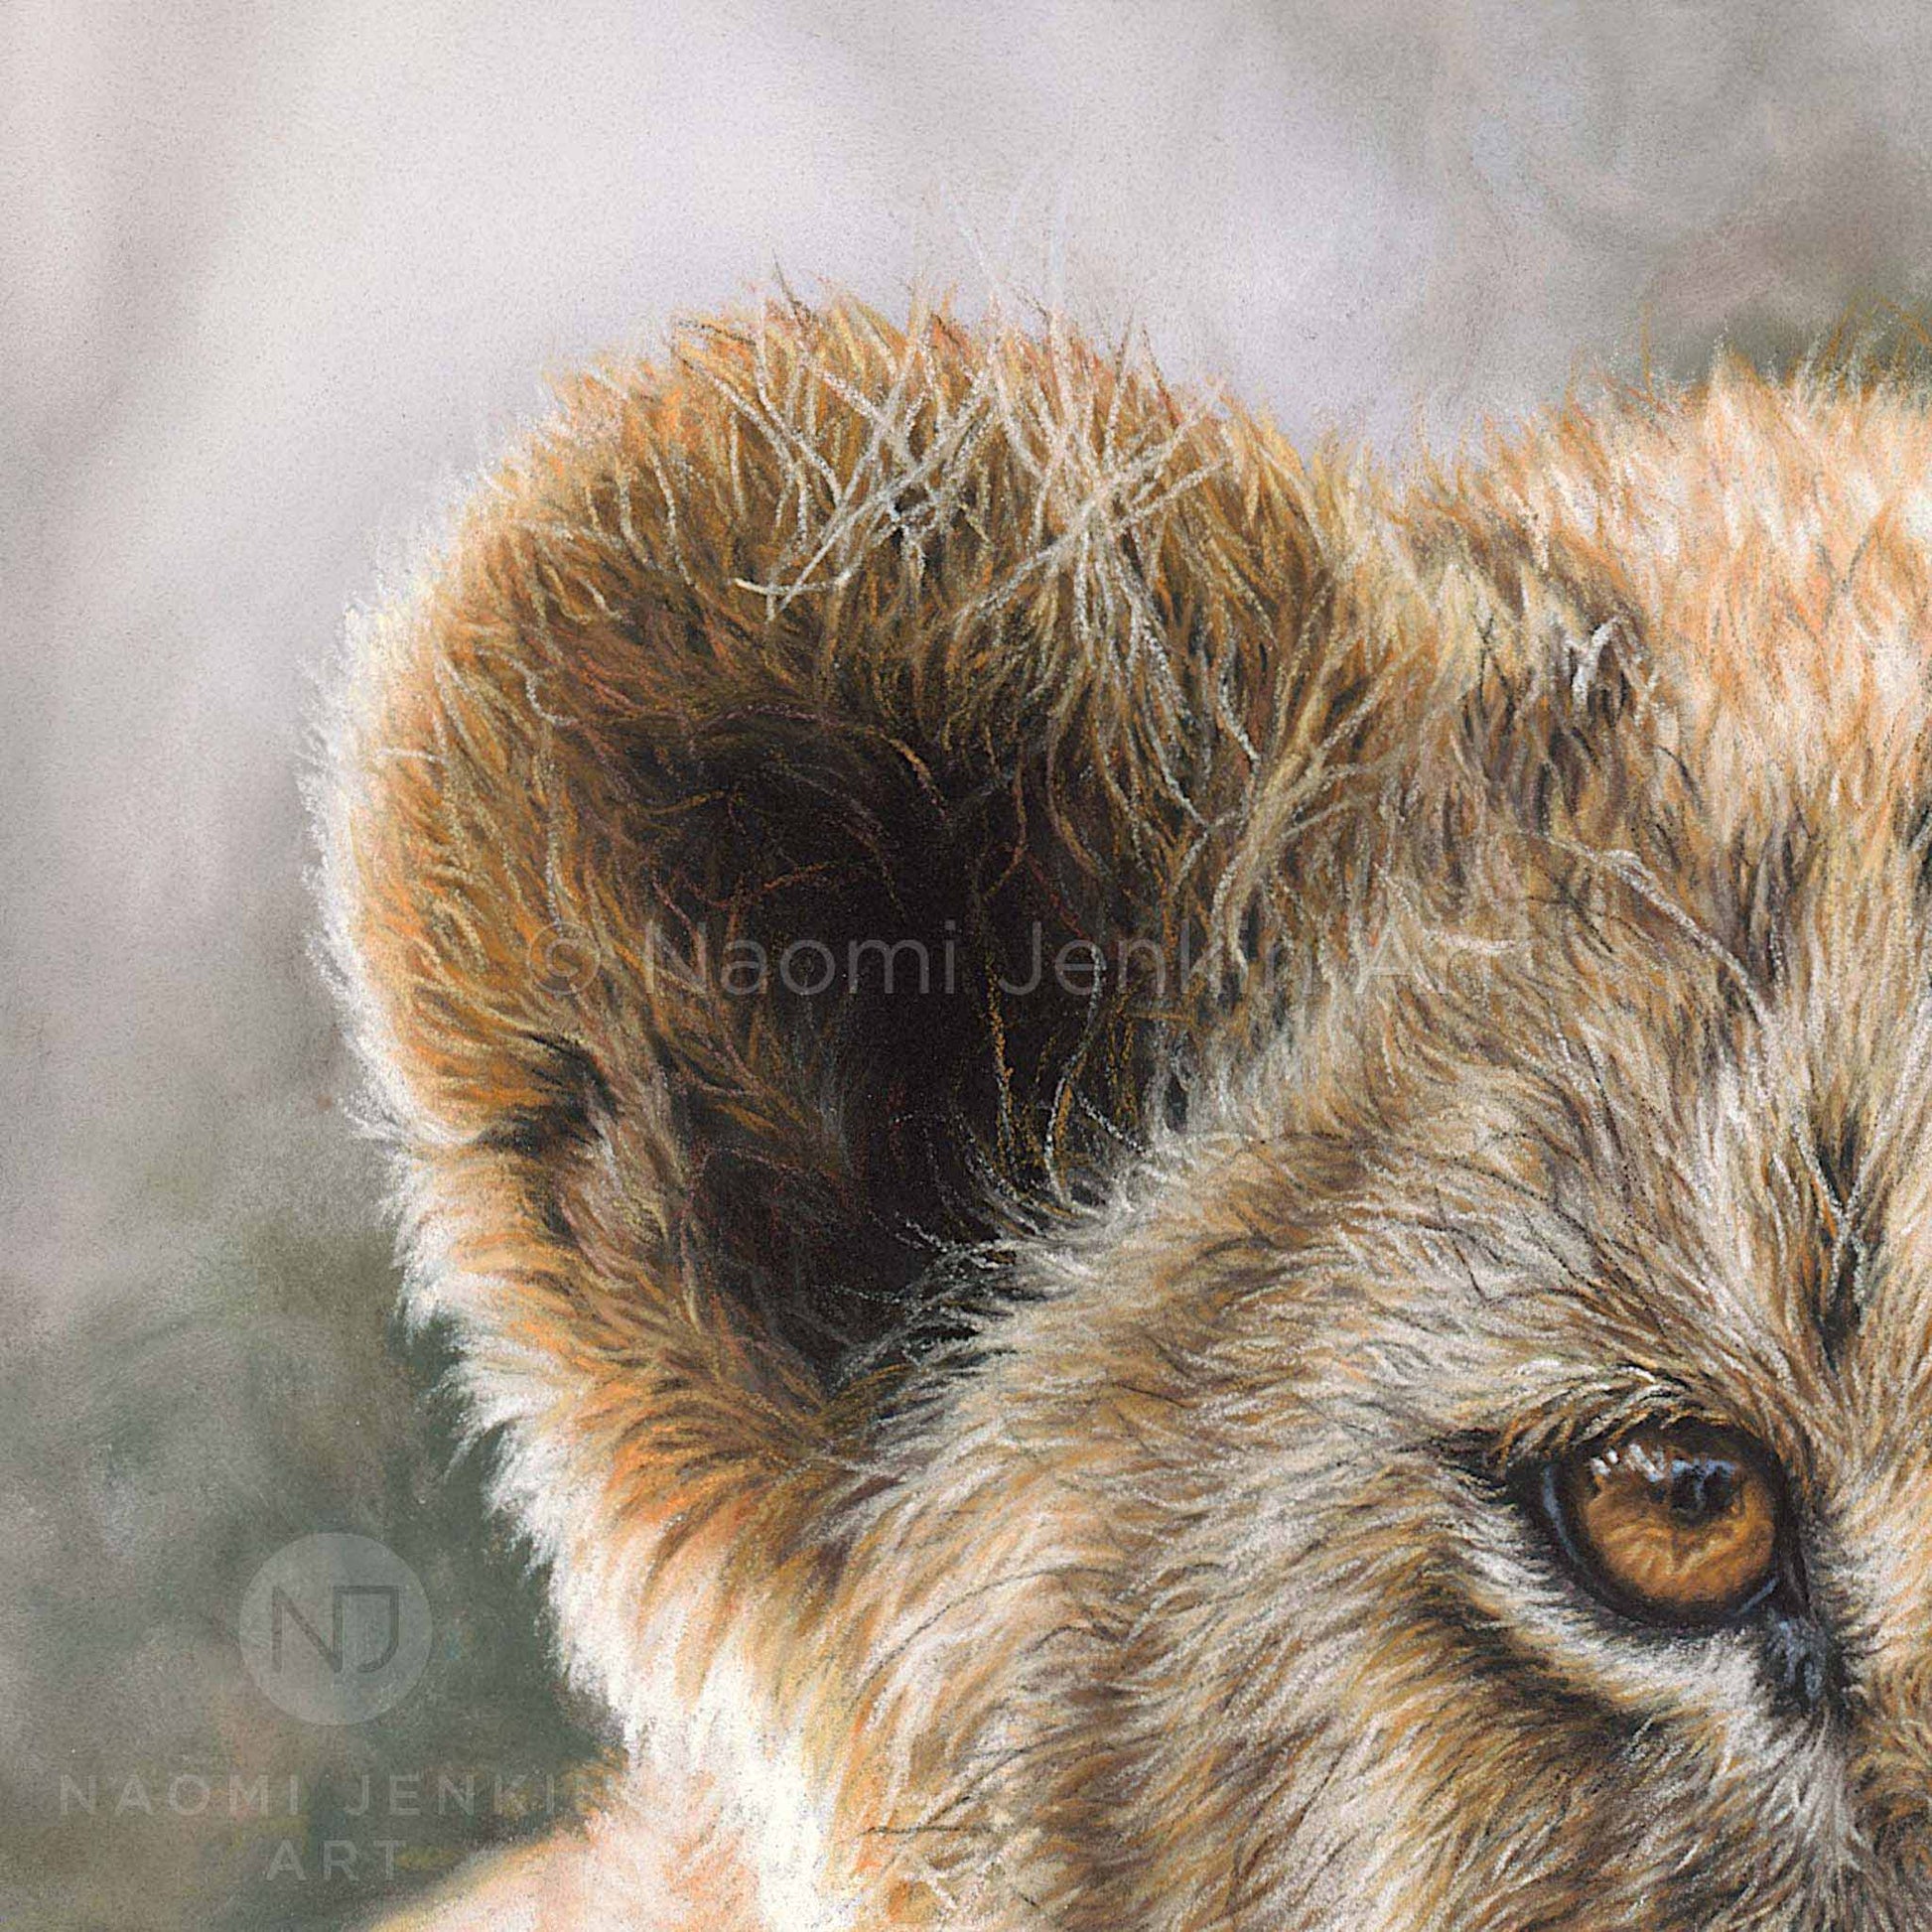 Close up lion cub ear from the 'Two Brothers' original lion artwork by Naomi Jenkin